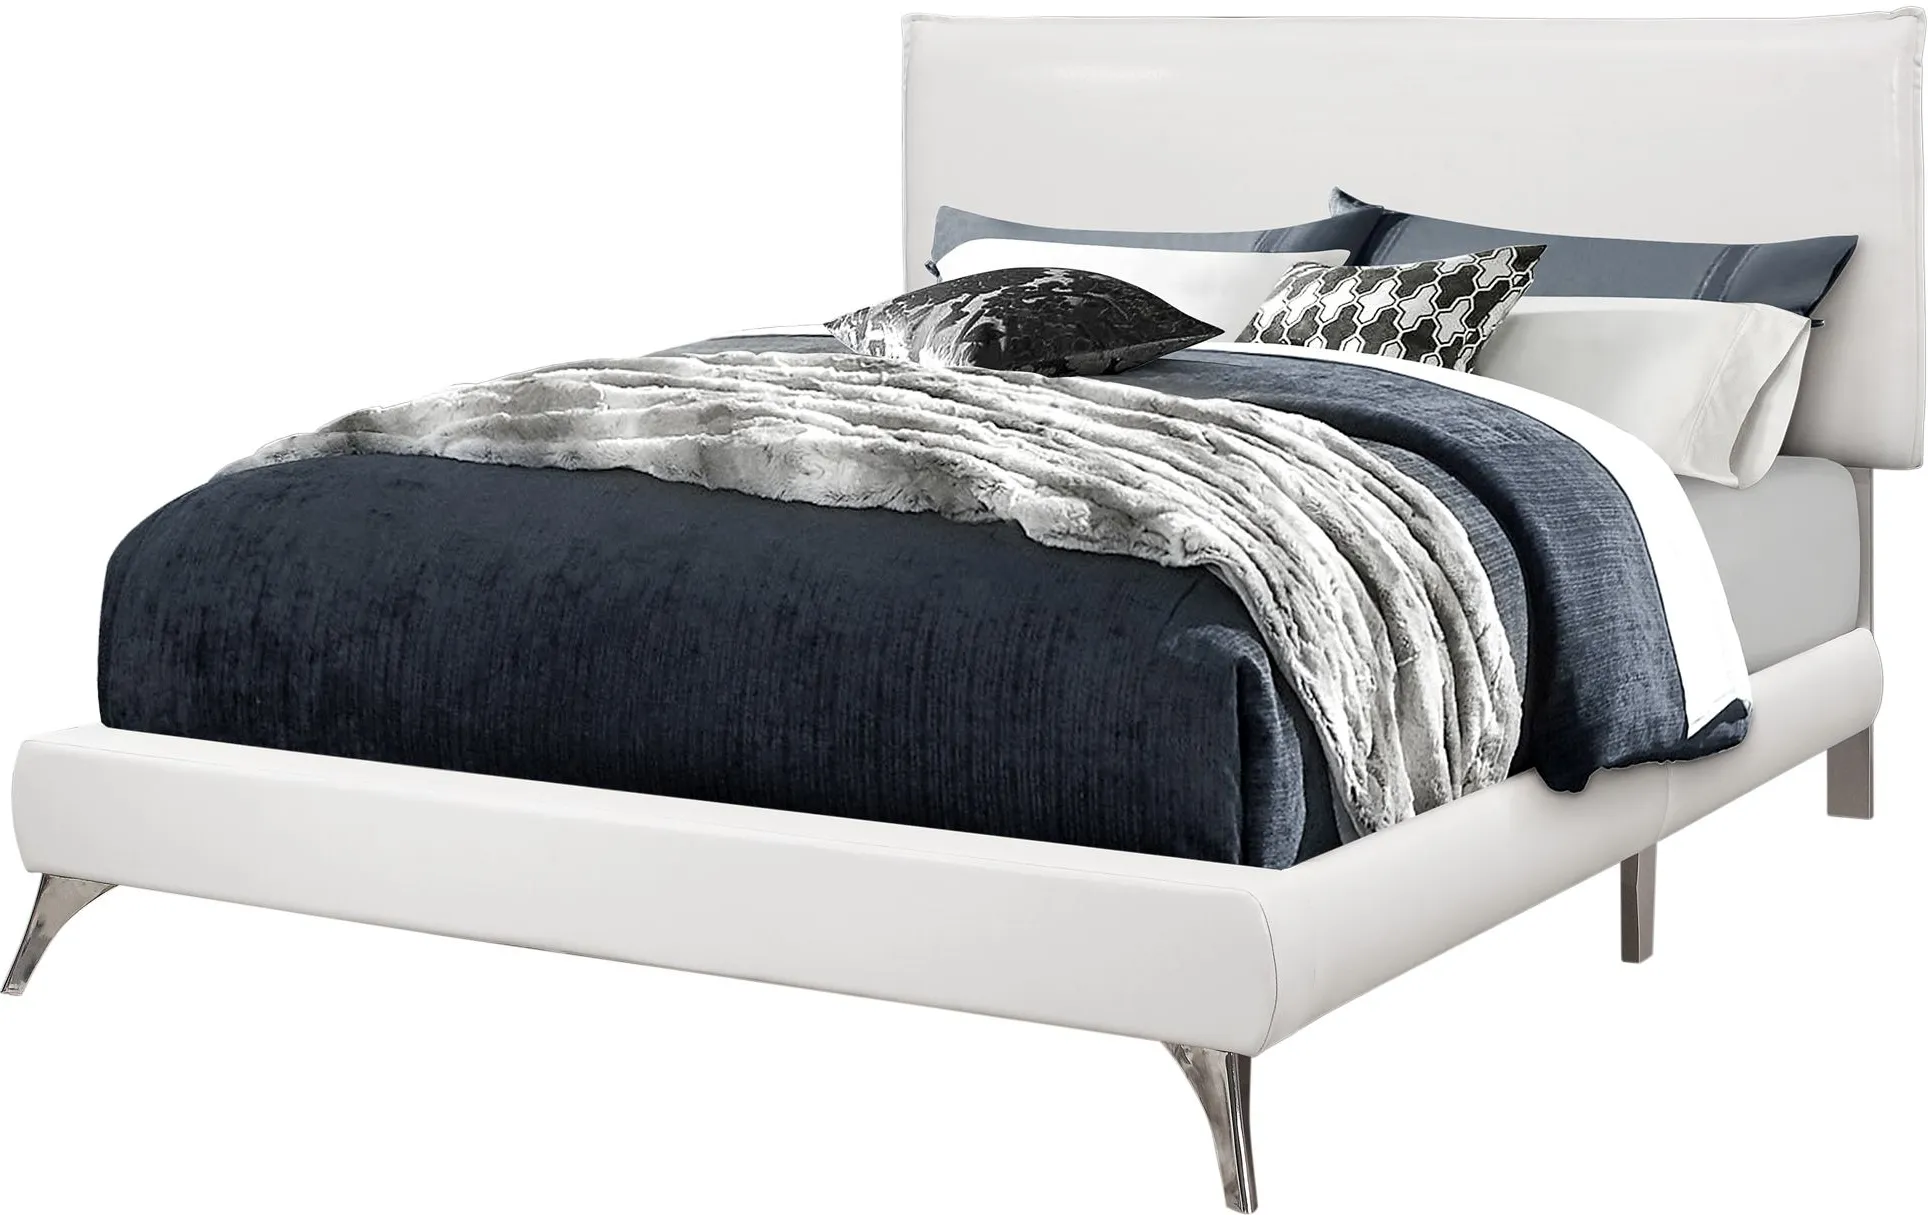 Bed, Queen Size, Platform, Bedroom, Frame, Upholstered, Pu Leather Look, Metal Legs, White, Chrome, Contemporary, Modern